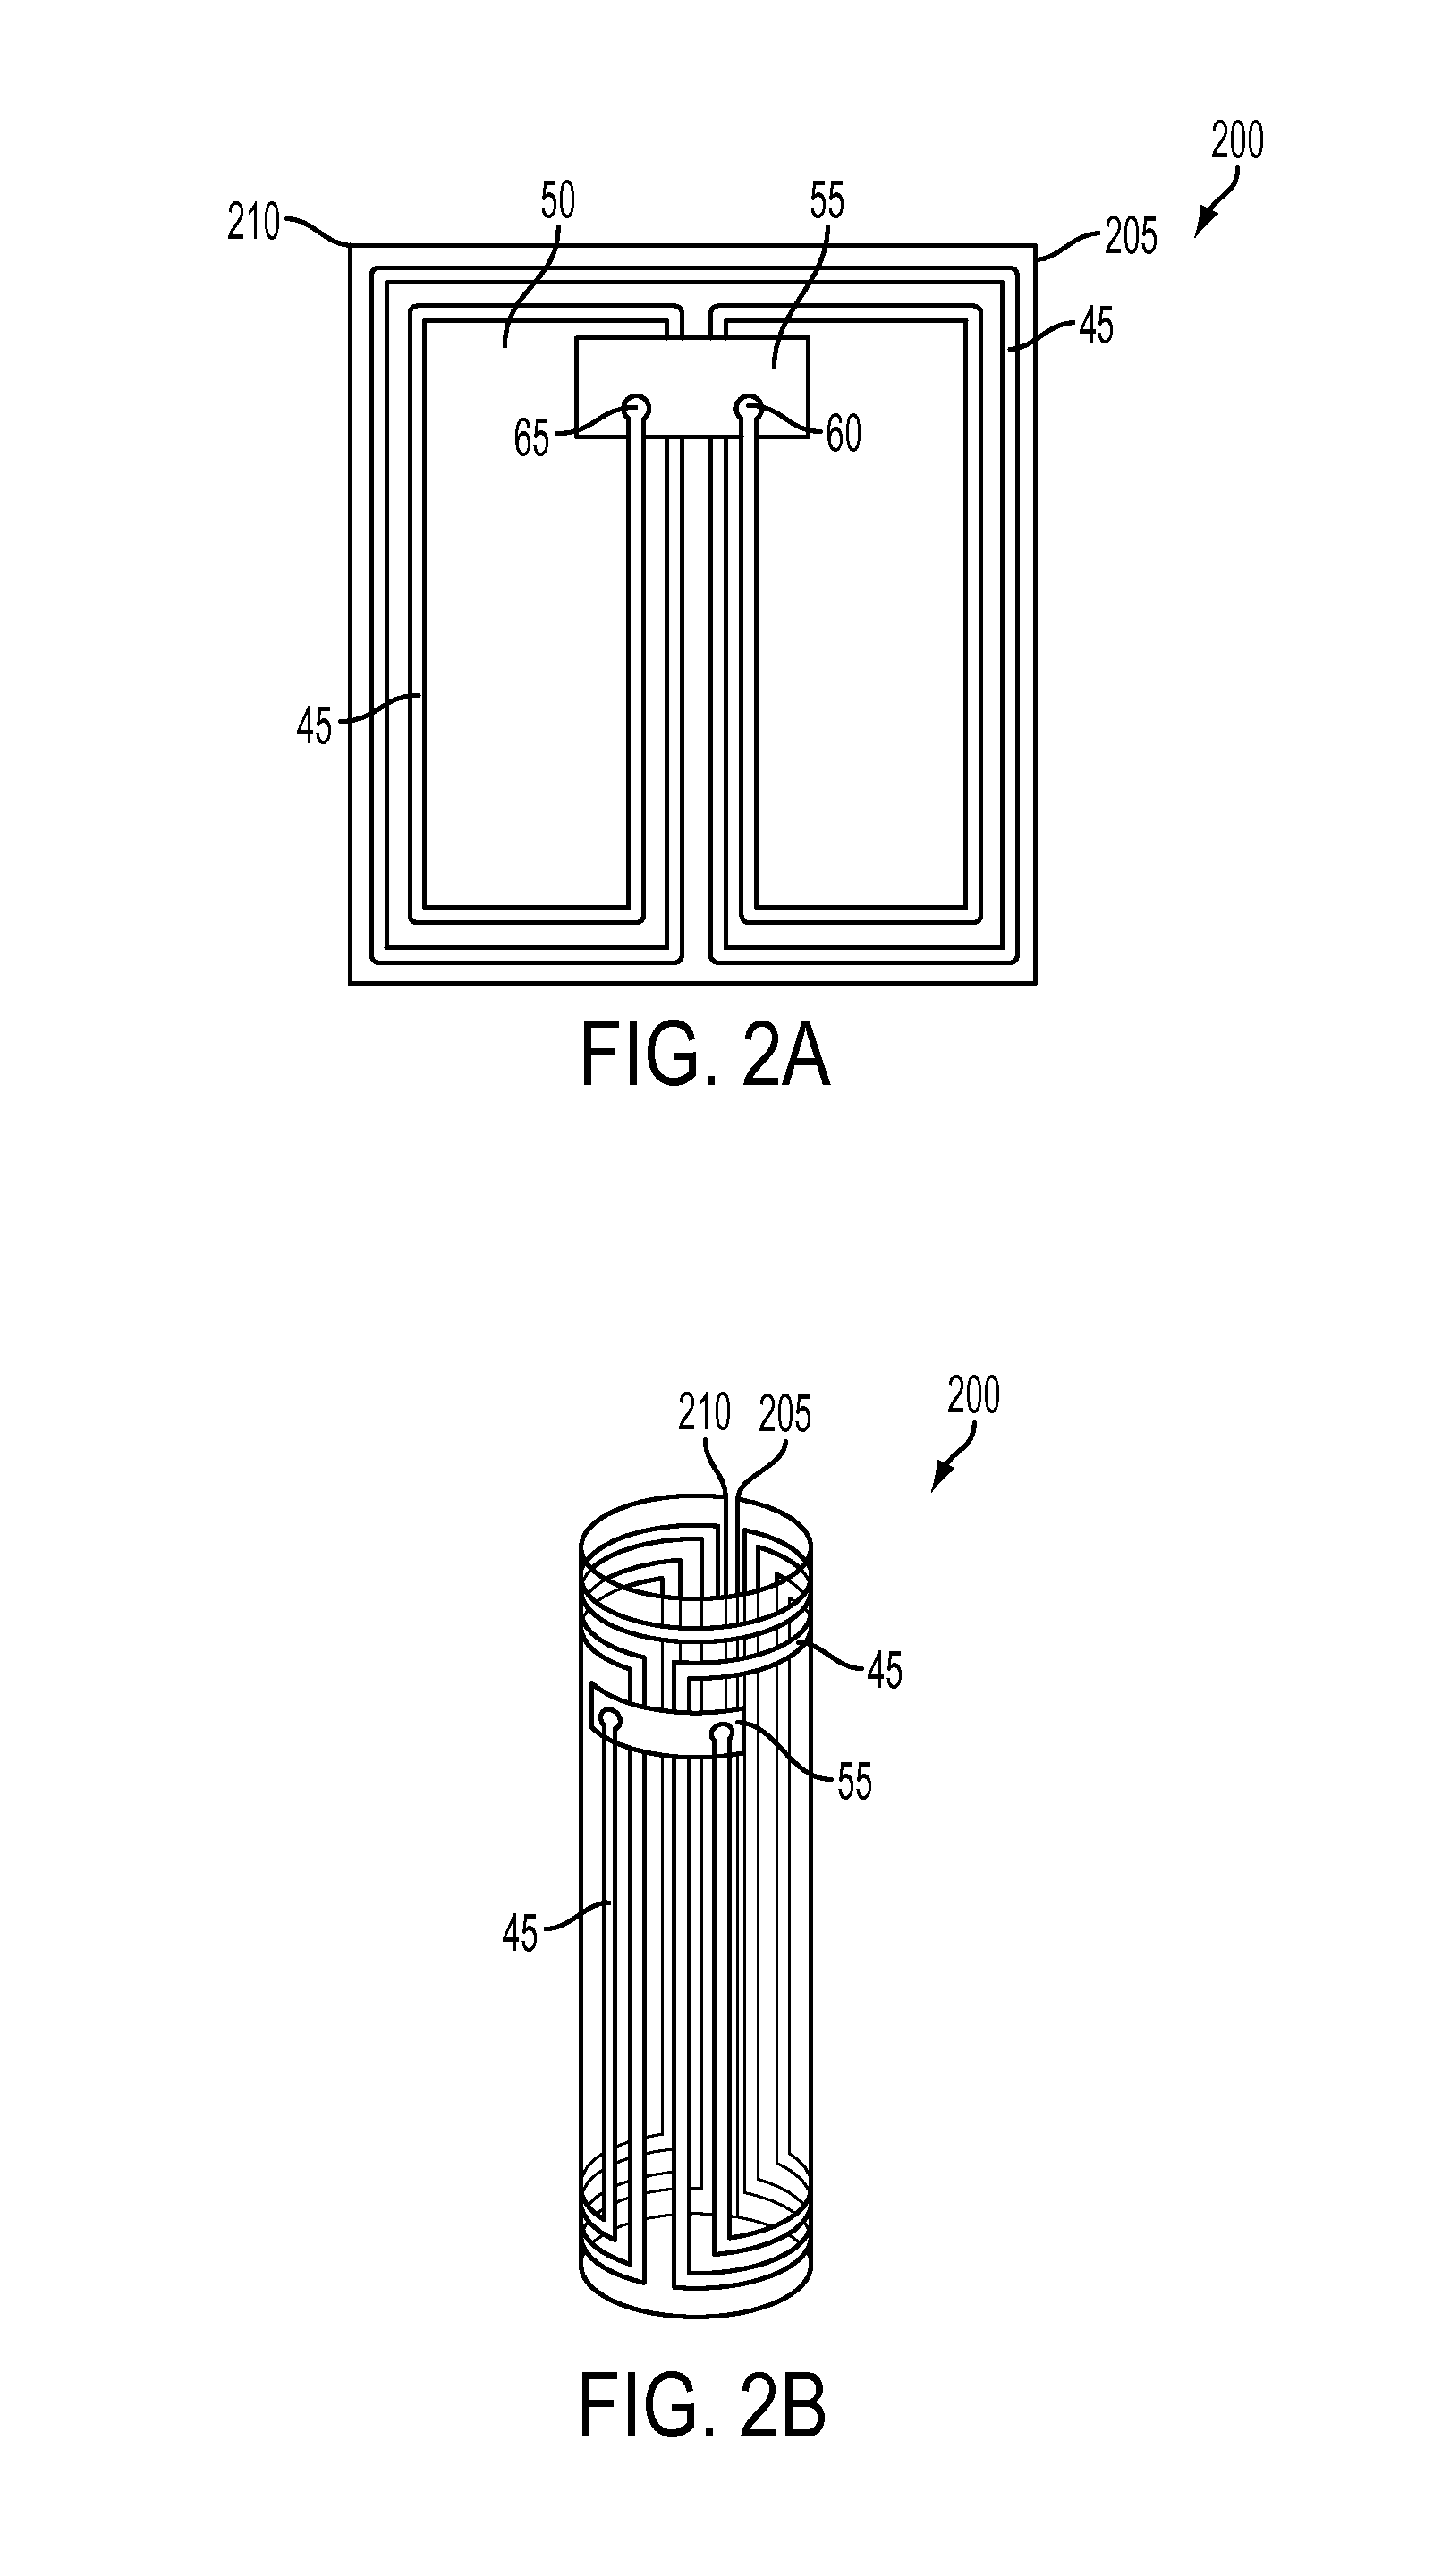 Omni-directional antenna for a cylindrical body